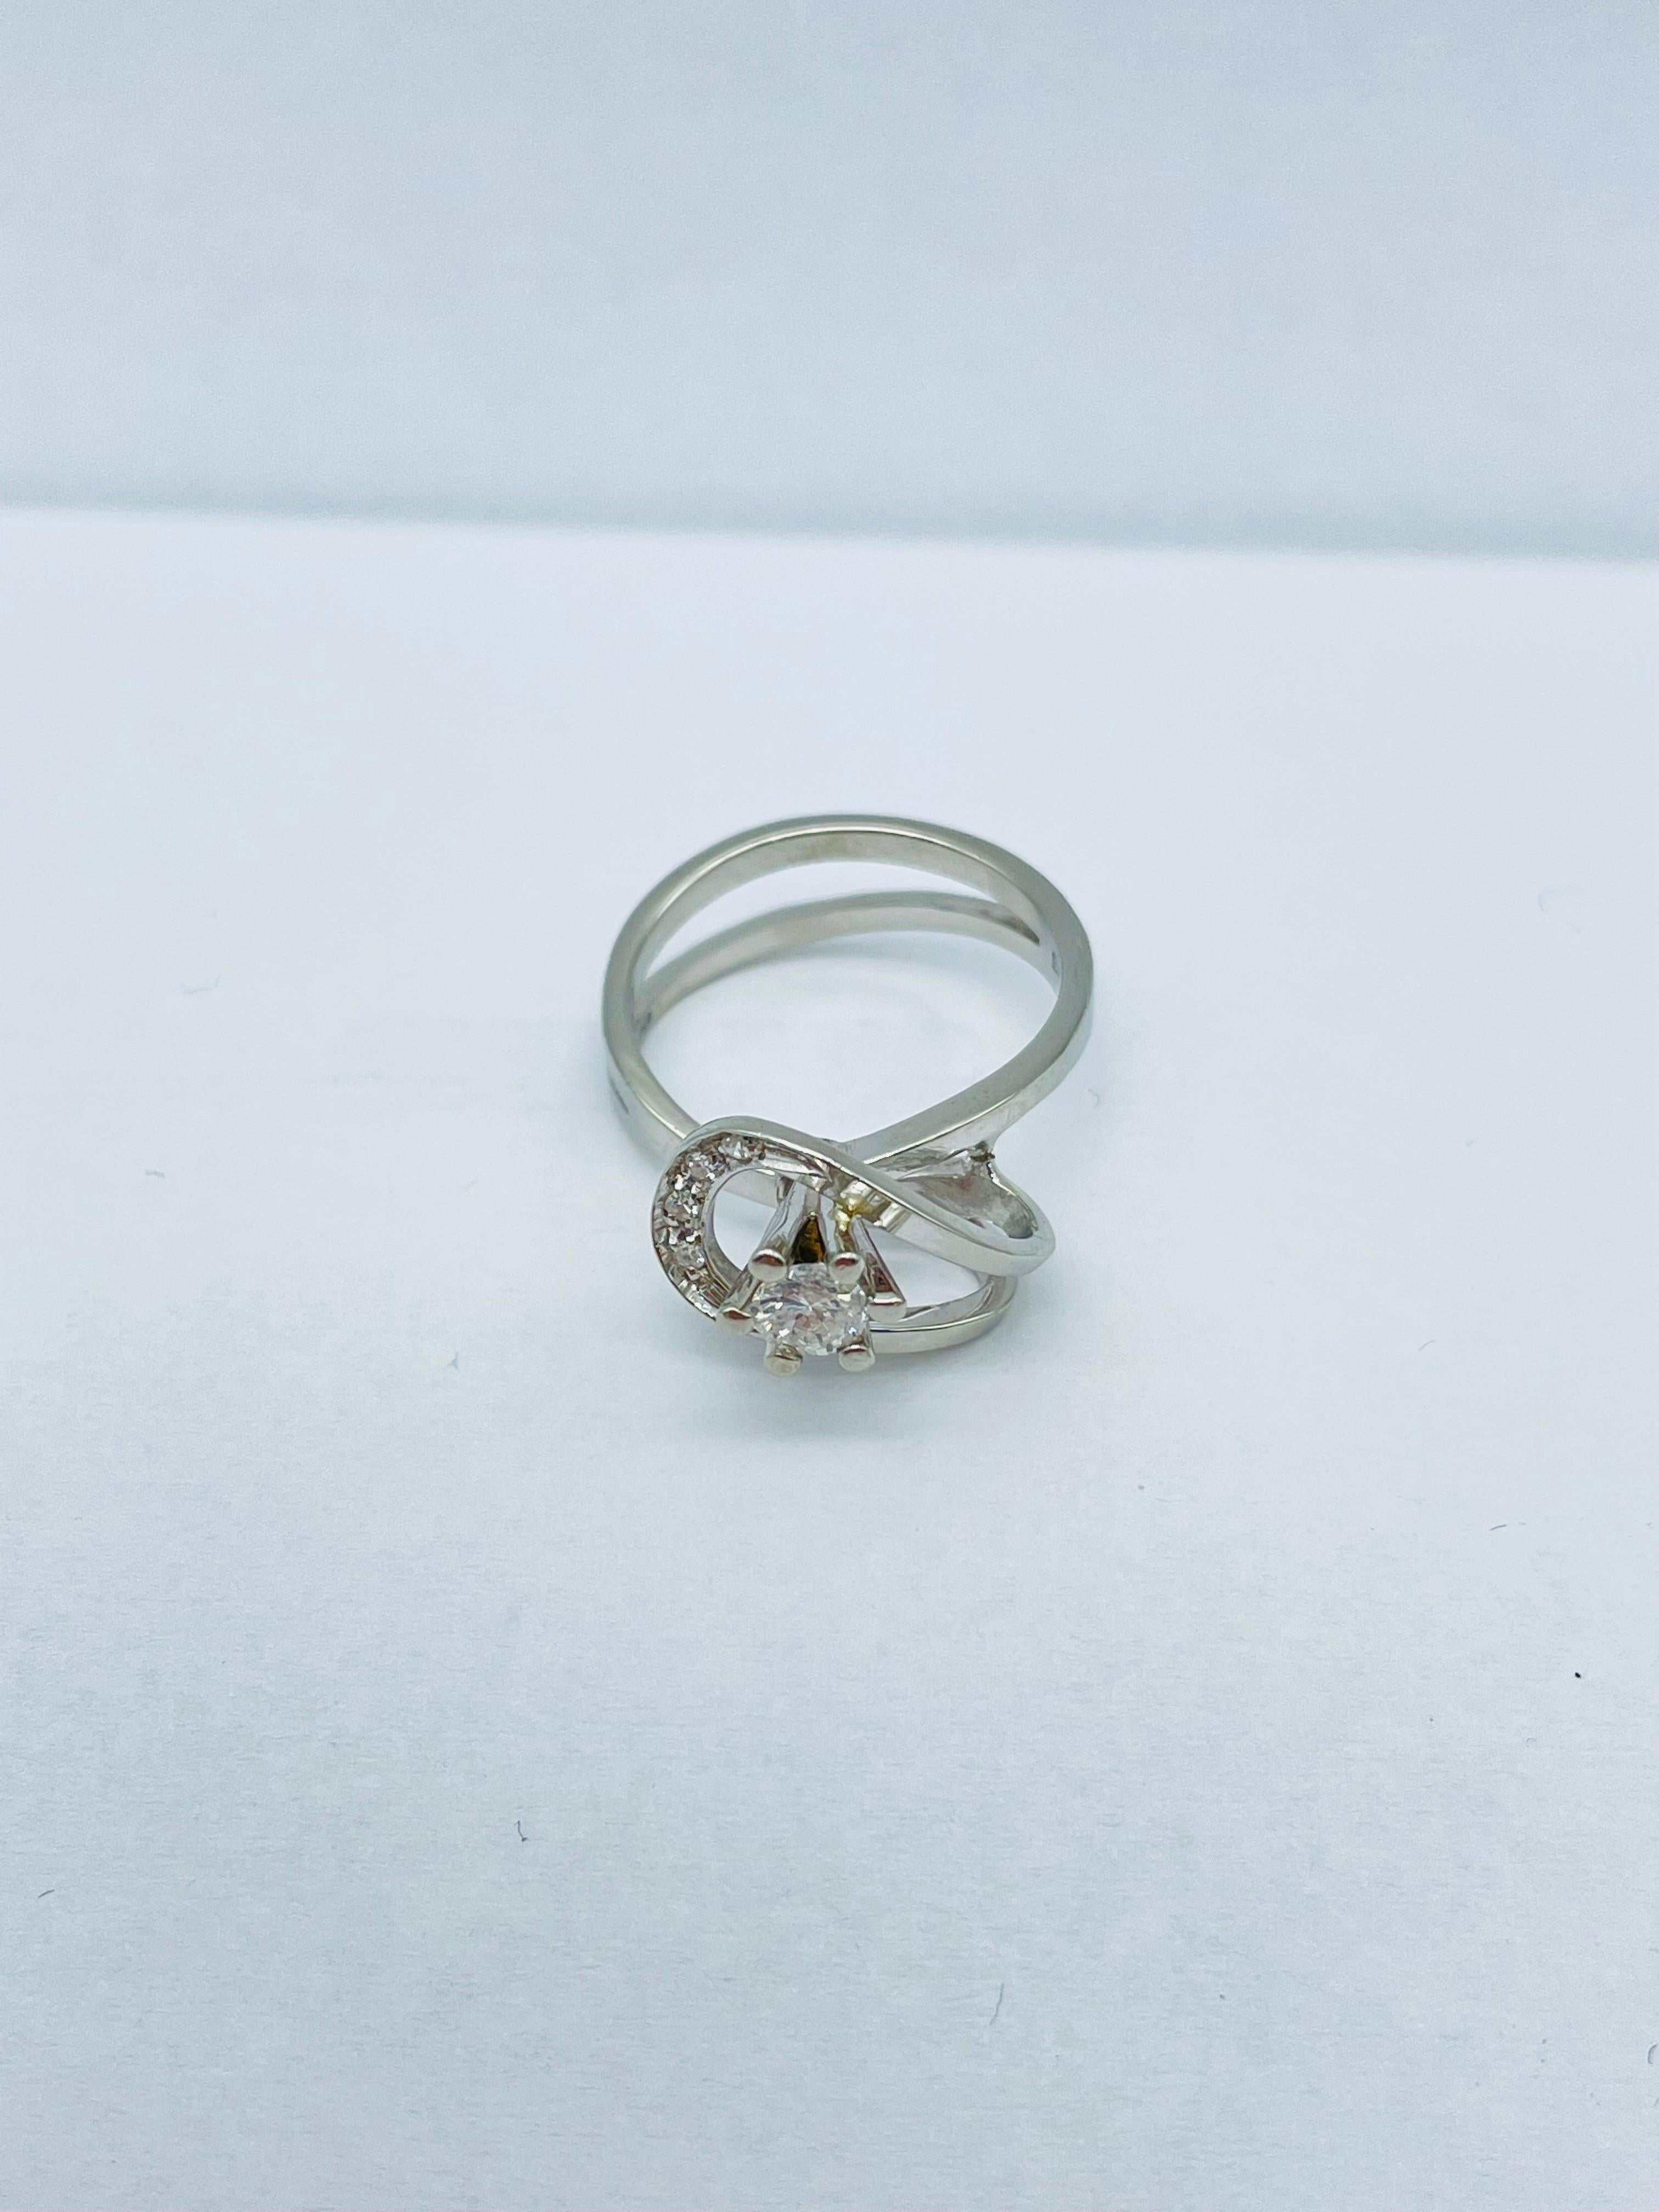 Beautiful 14k White Gold Solitaire Ring with a 0.32 Carat Diamond 2